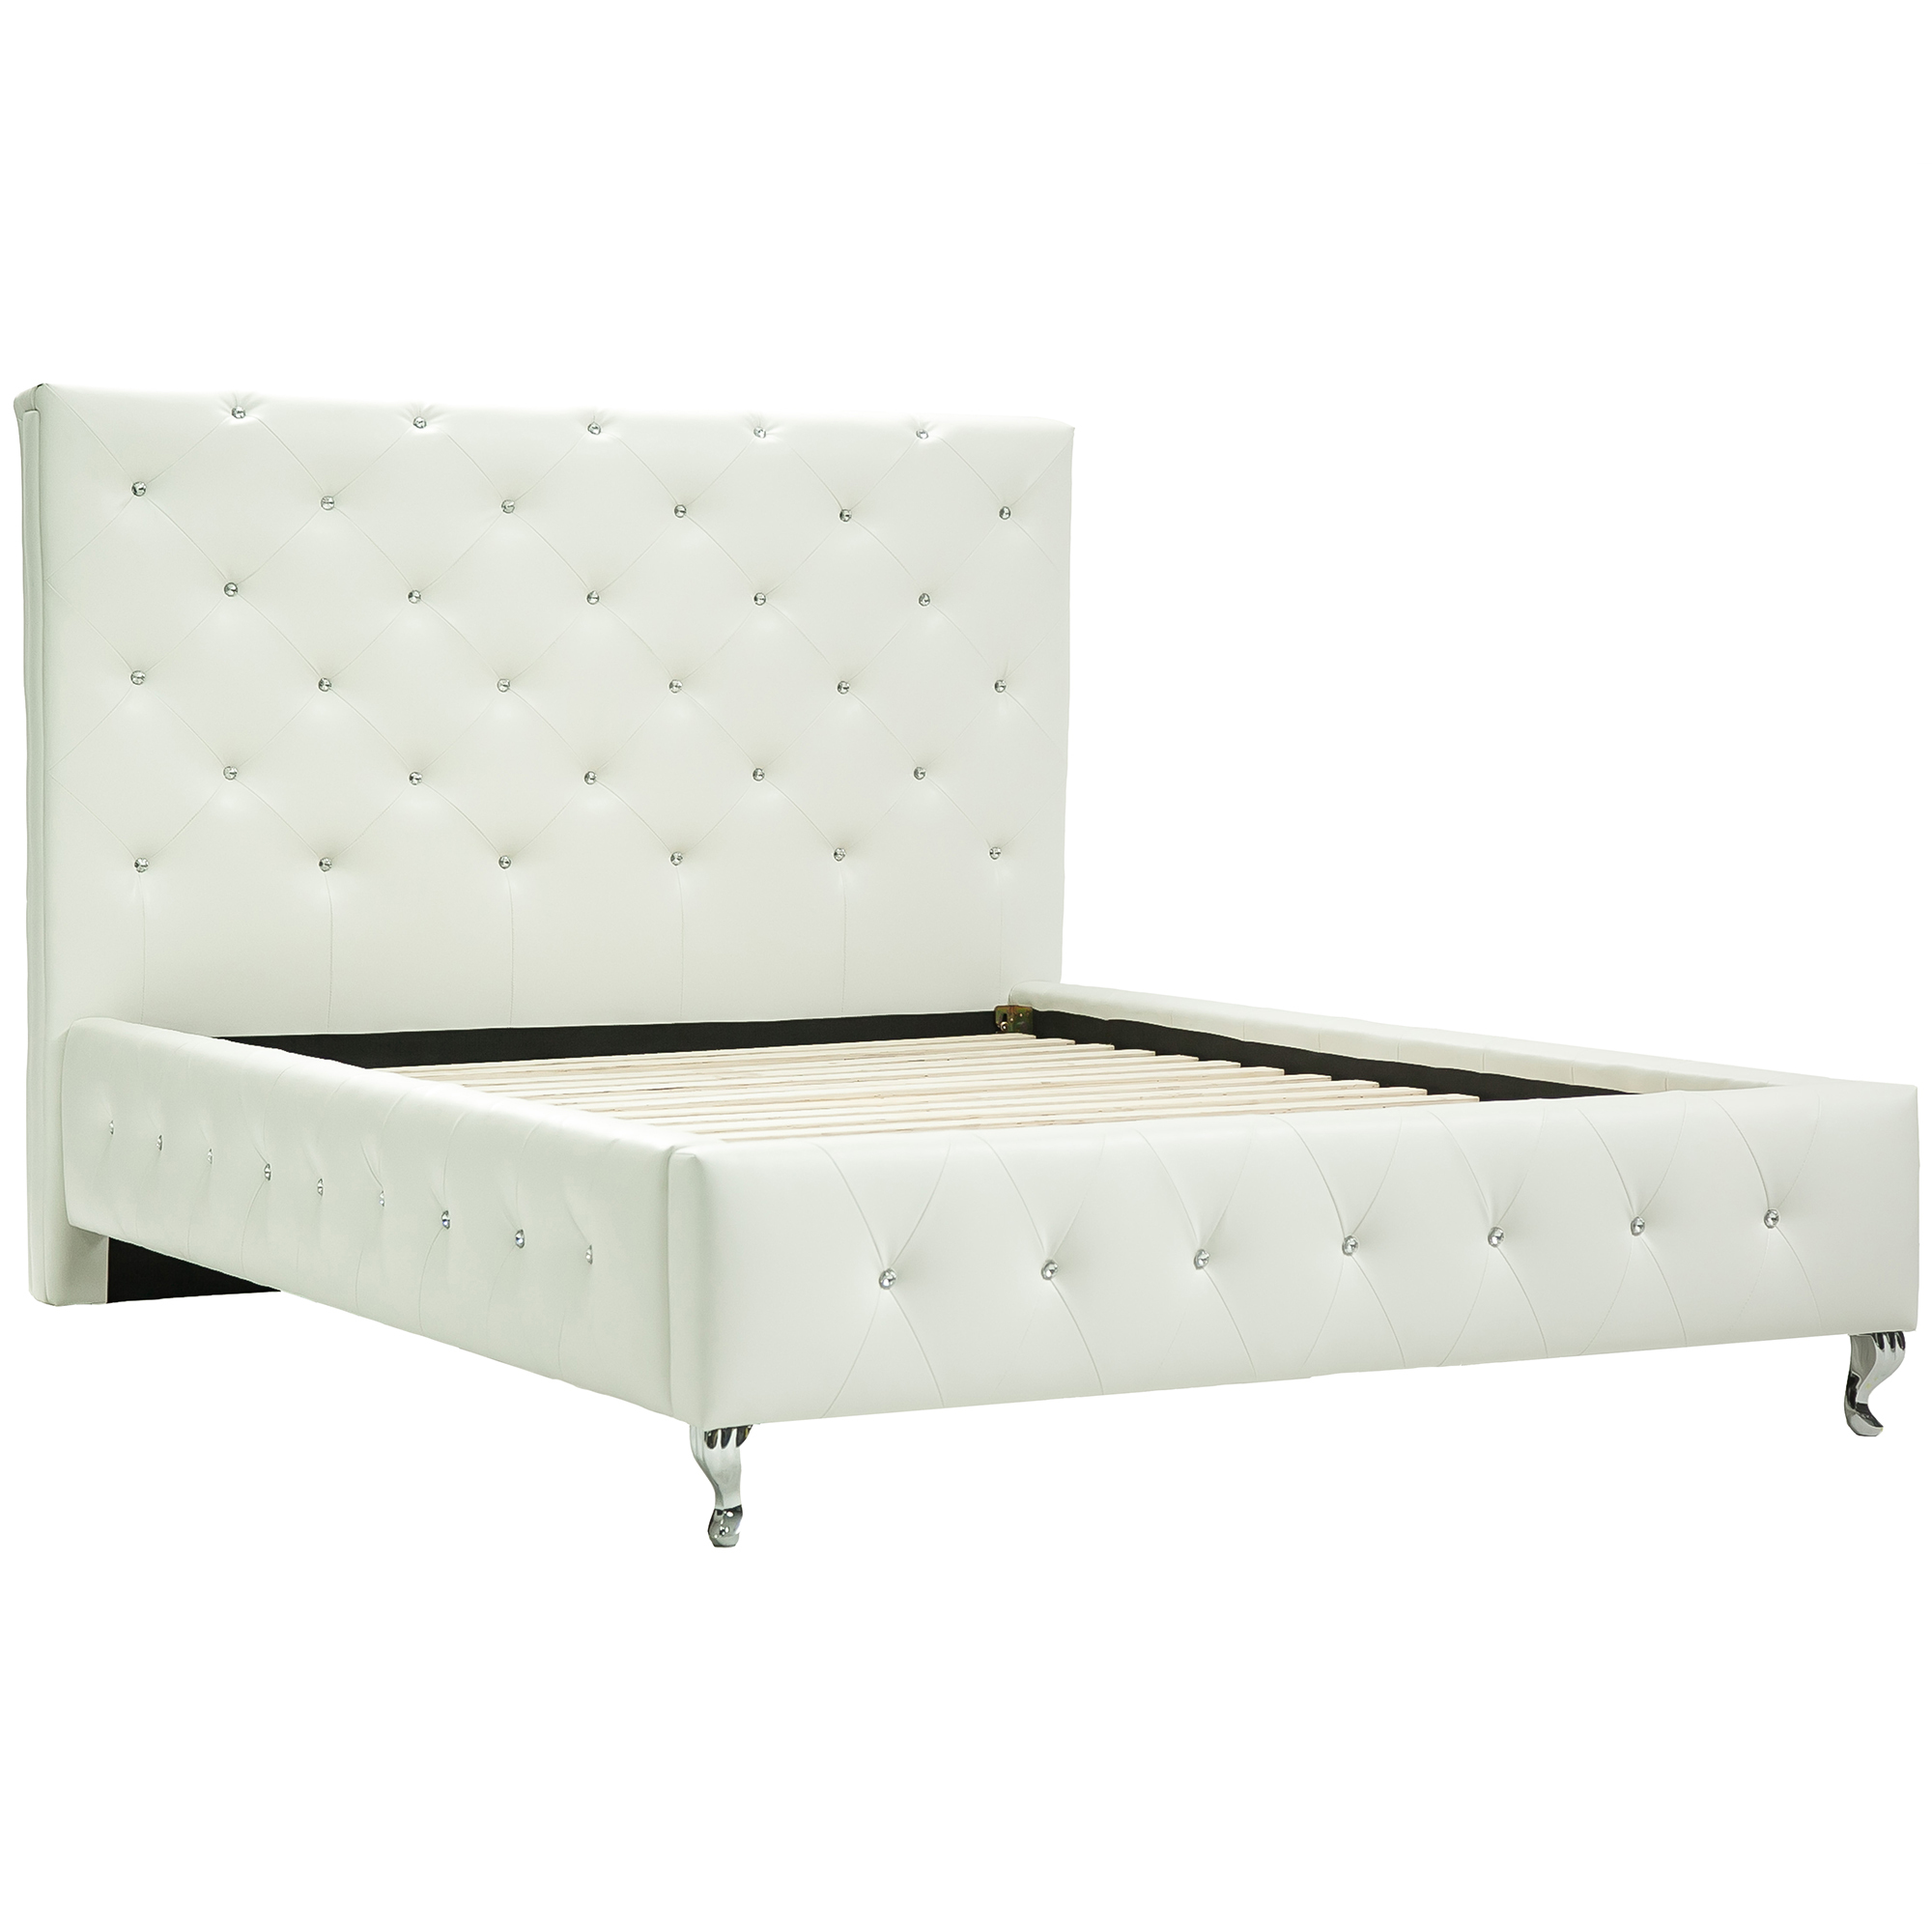 New York King Single Bed Frame, Individual Bed Frame